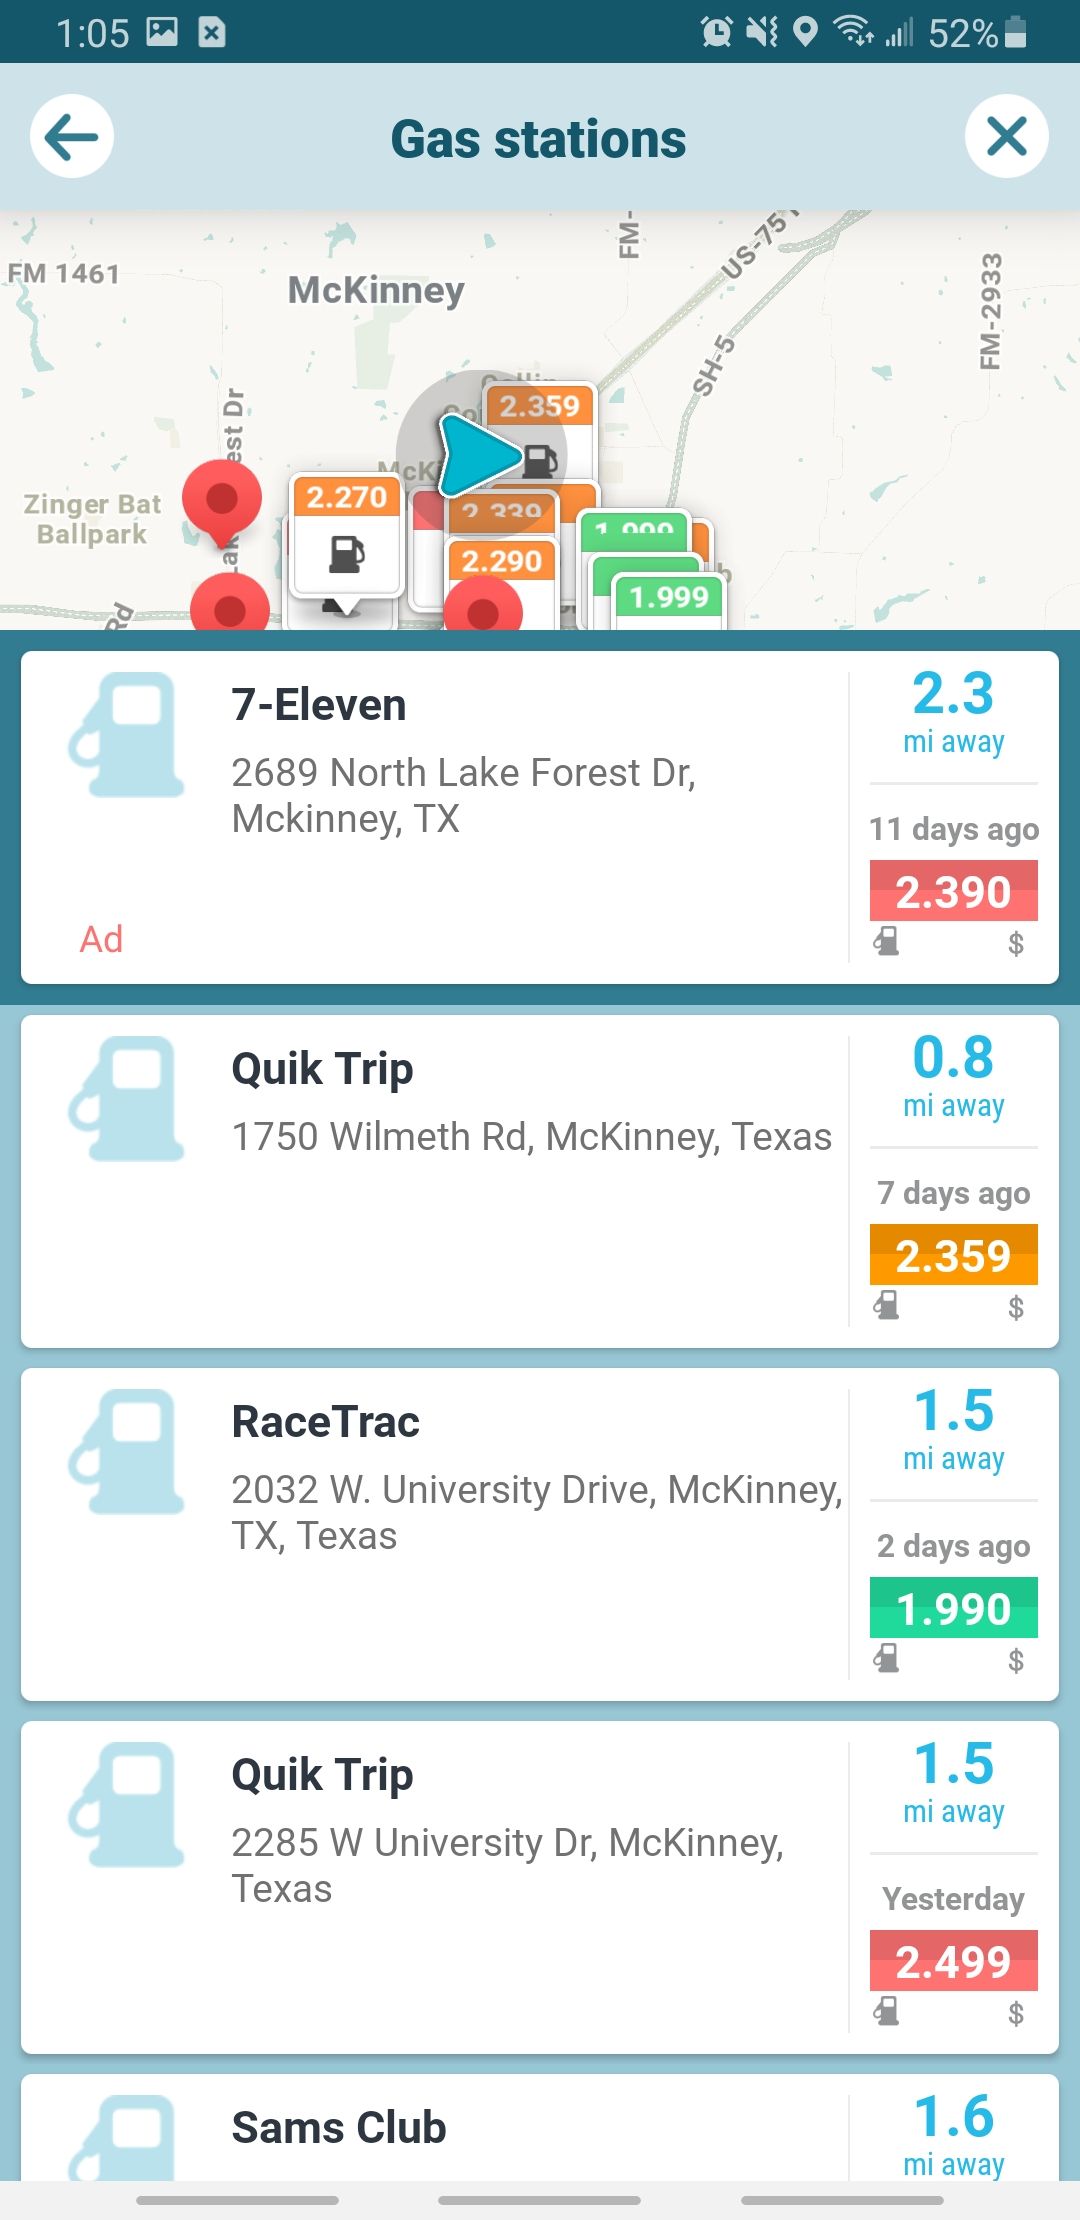 waze app gas stations page with nearby gas stations and prices